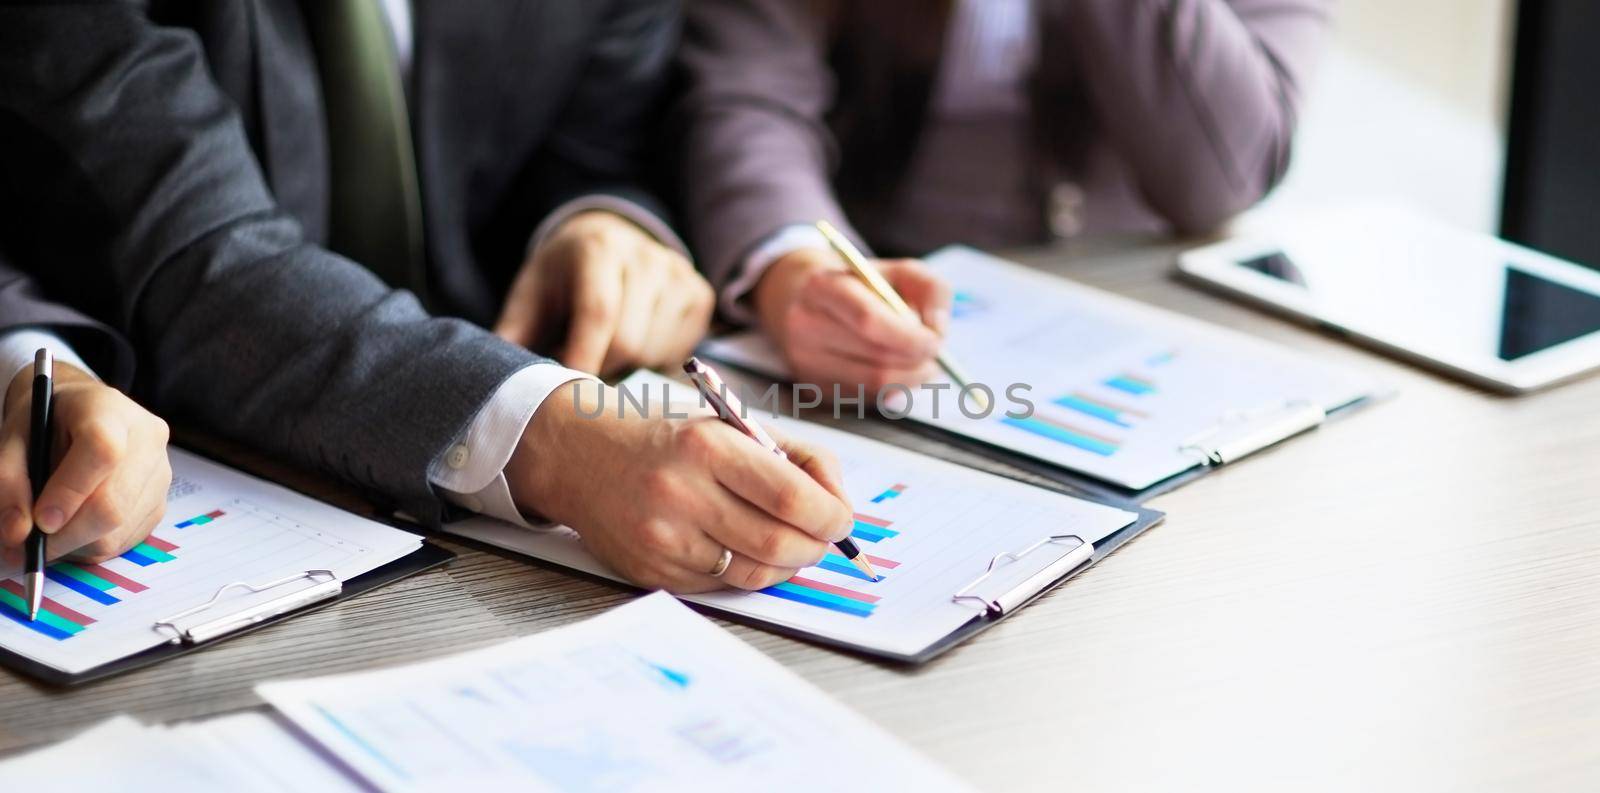 Banking business or financial analyst desktop accounting charts, pens indicates in the graphics by SmartPhotoLab